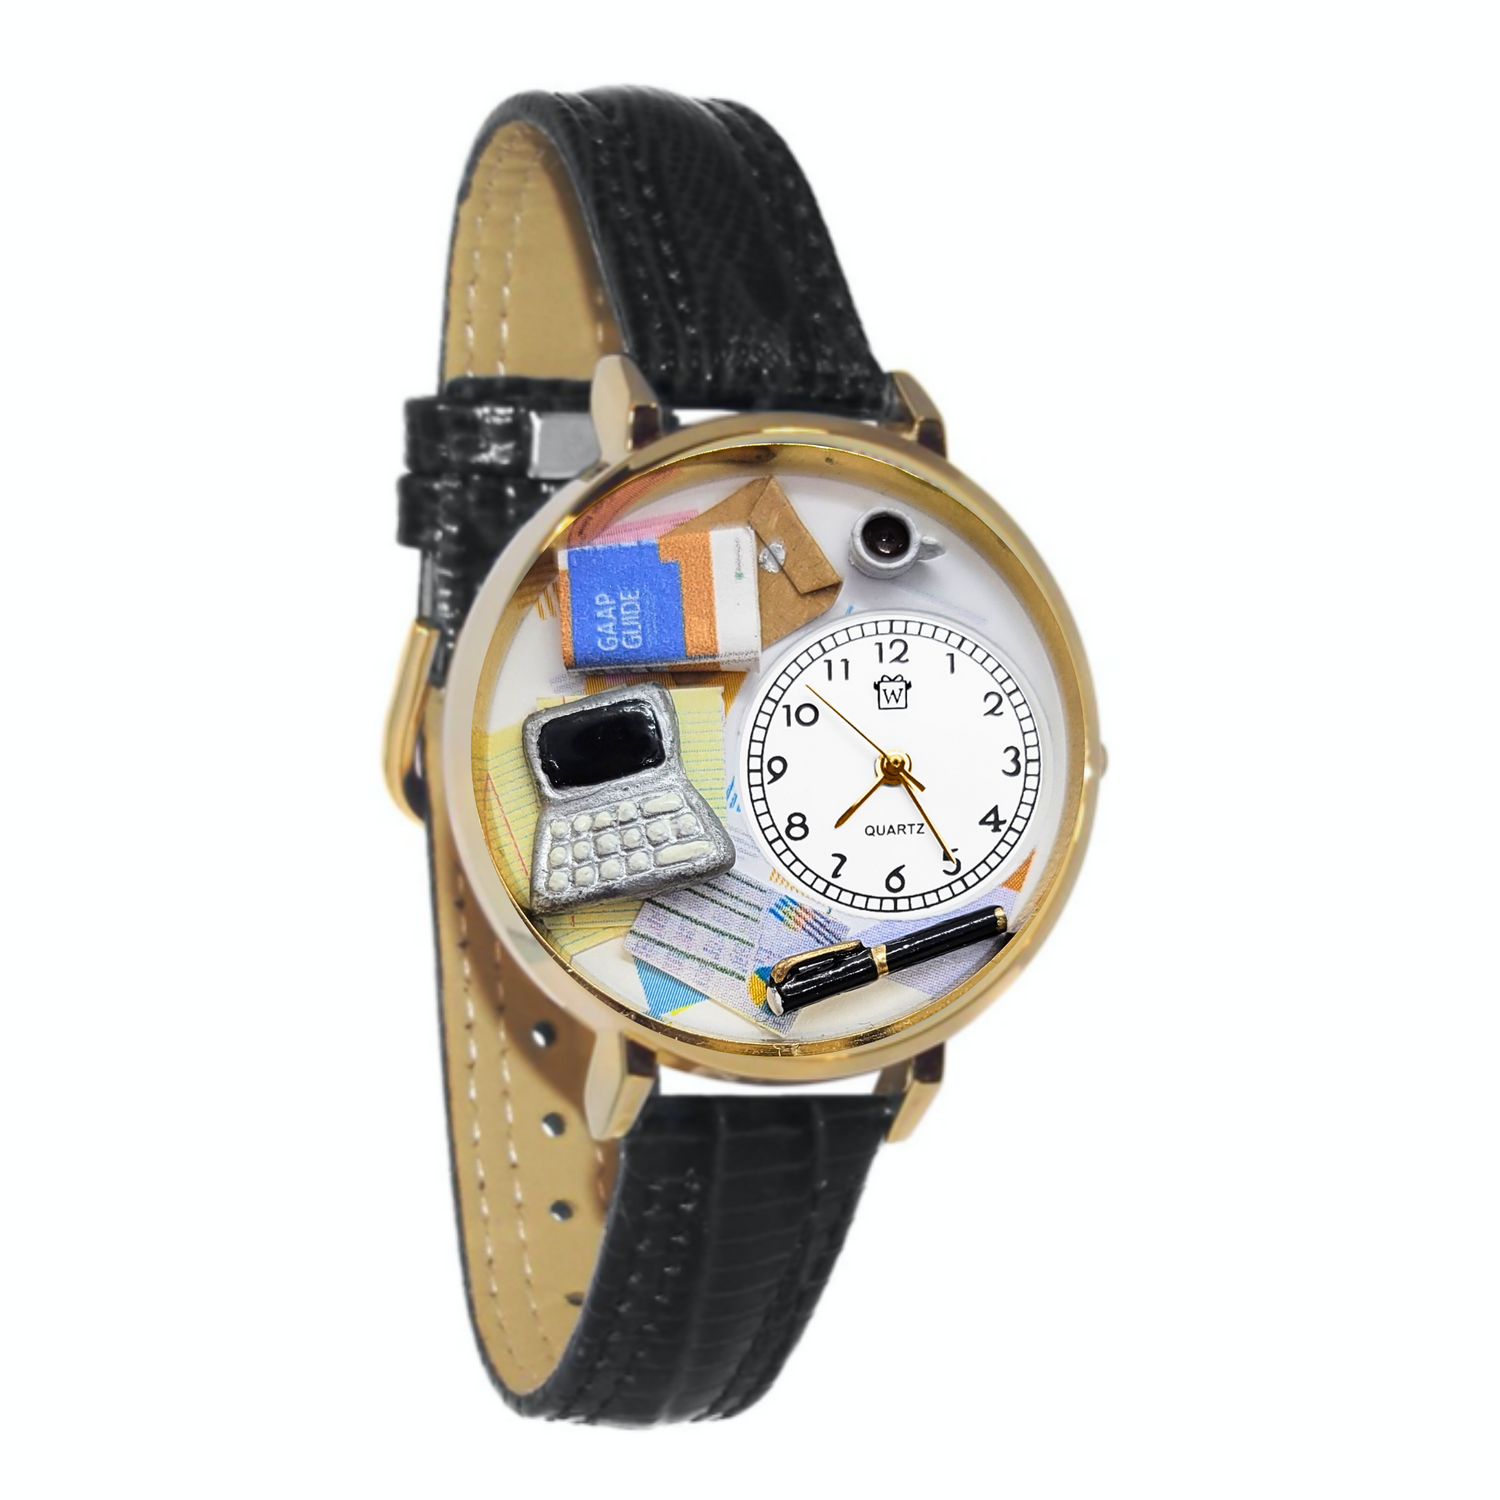 Whimsical Gifts | Accountant 3D Watch Large Style | Handmade in USA | Professions Themed | Business & Legal | Novelty Unique Fun Miniatures Gift | Gold Finish Black Leather Watch Band